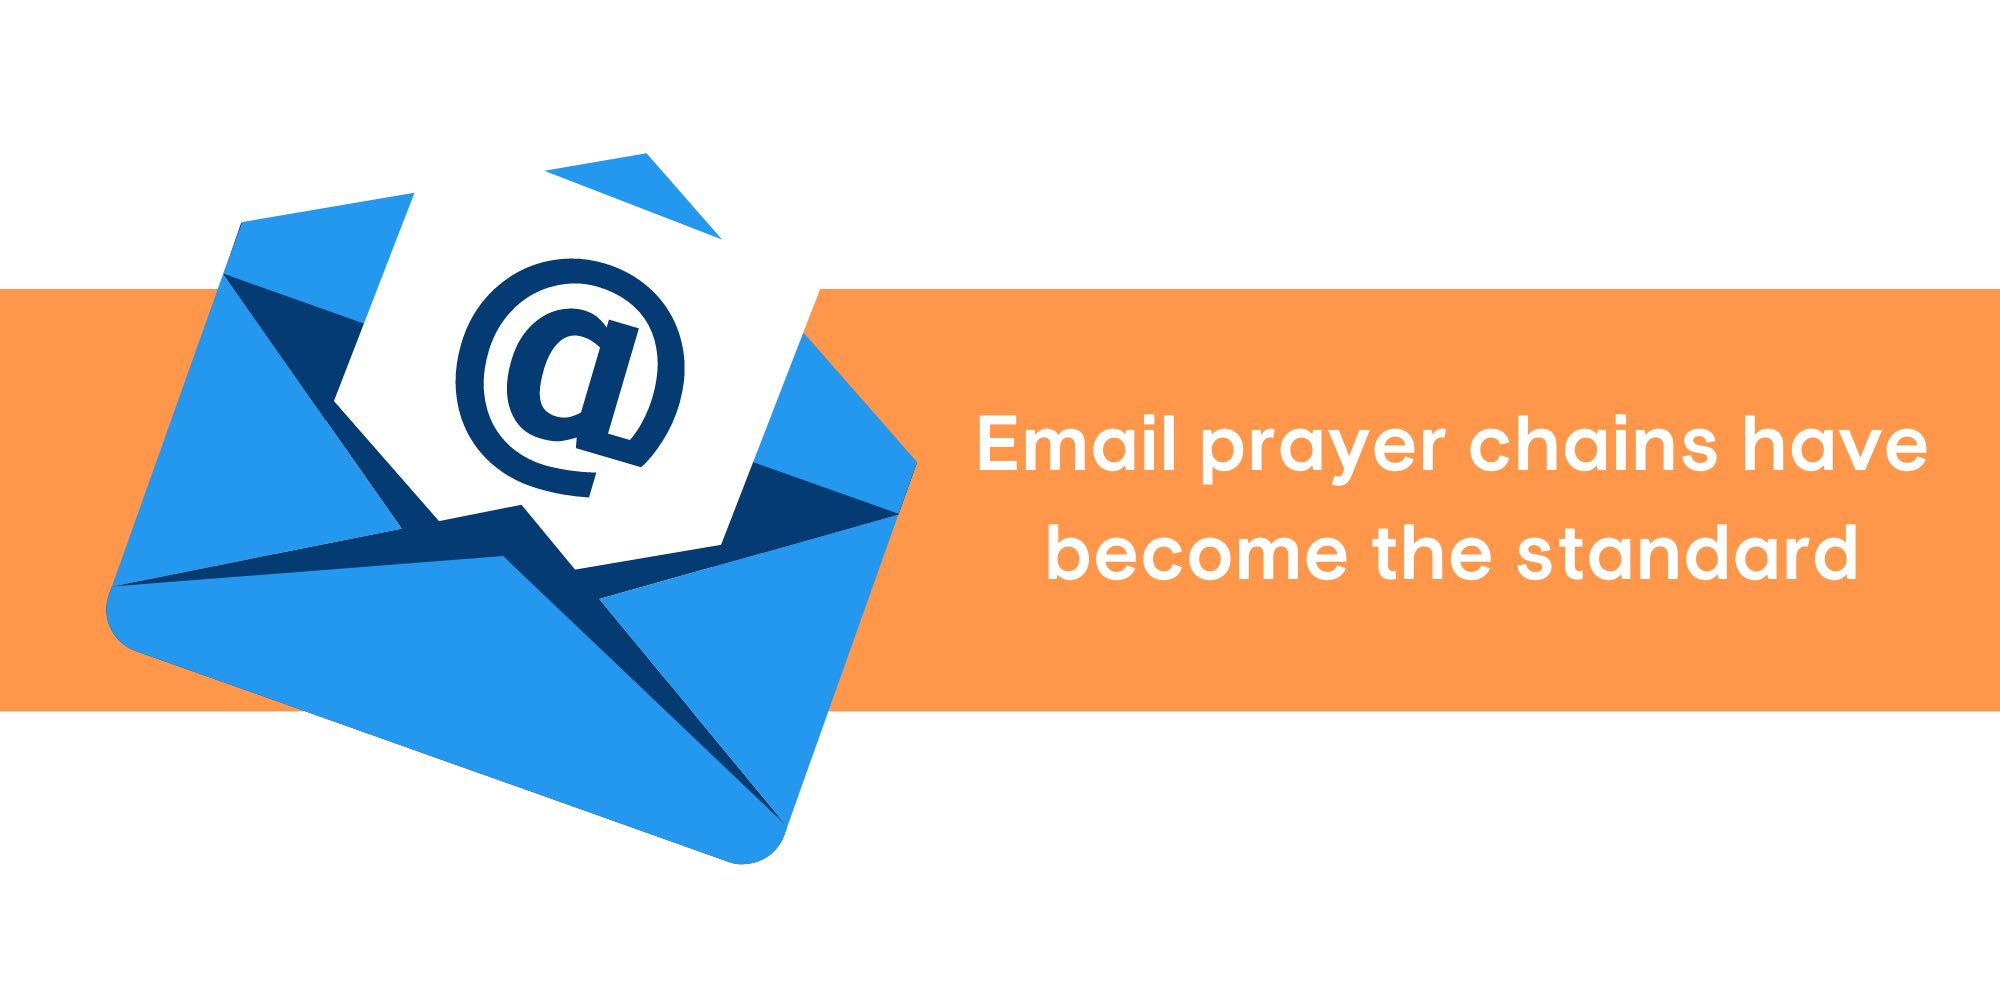 Email prayer chains are the most popular form of prayer chains by a long shot